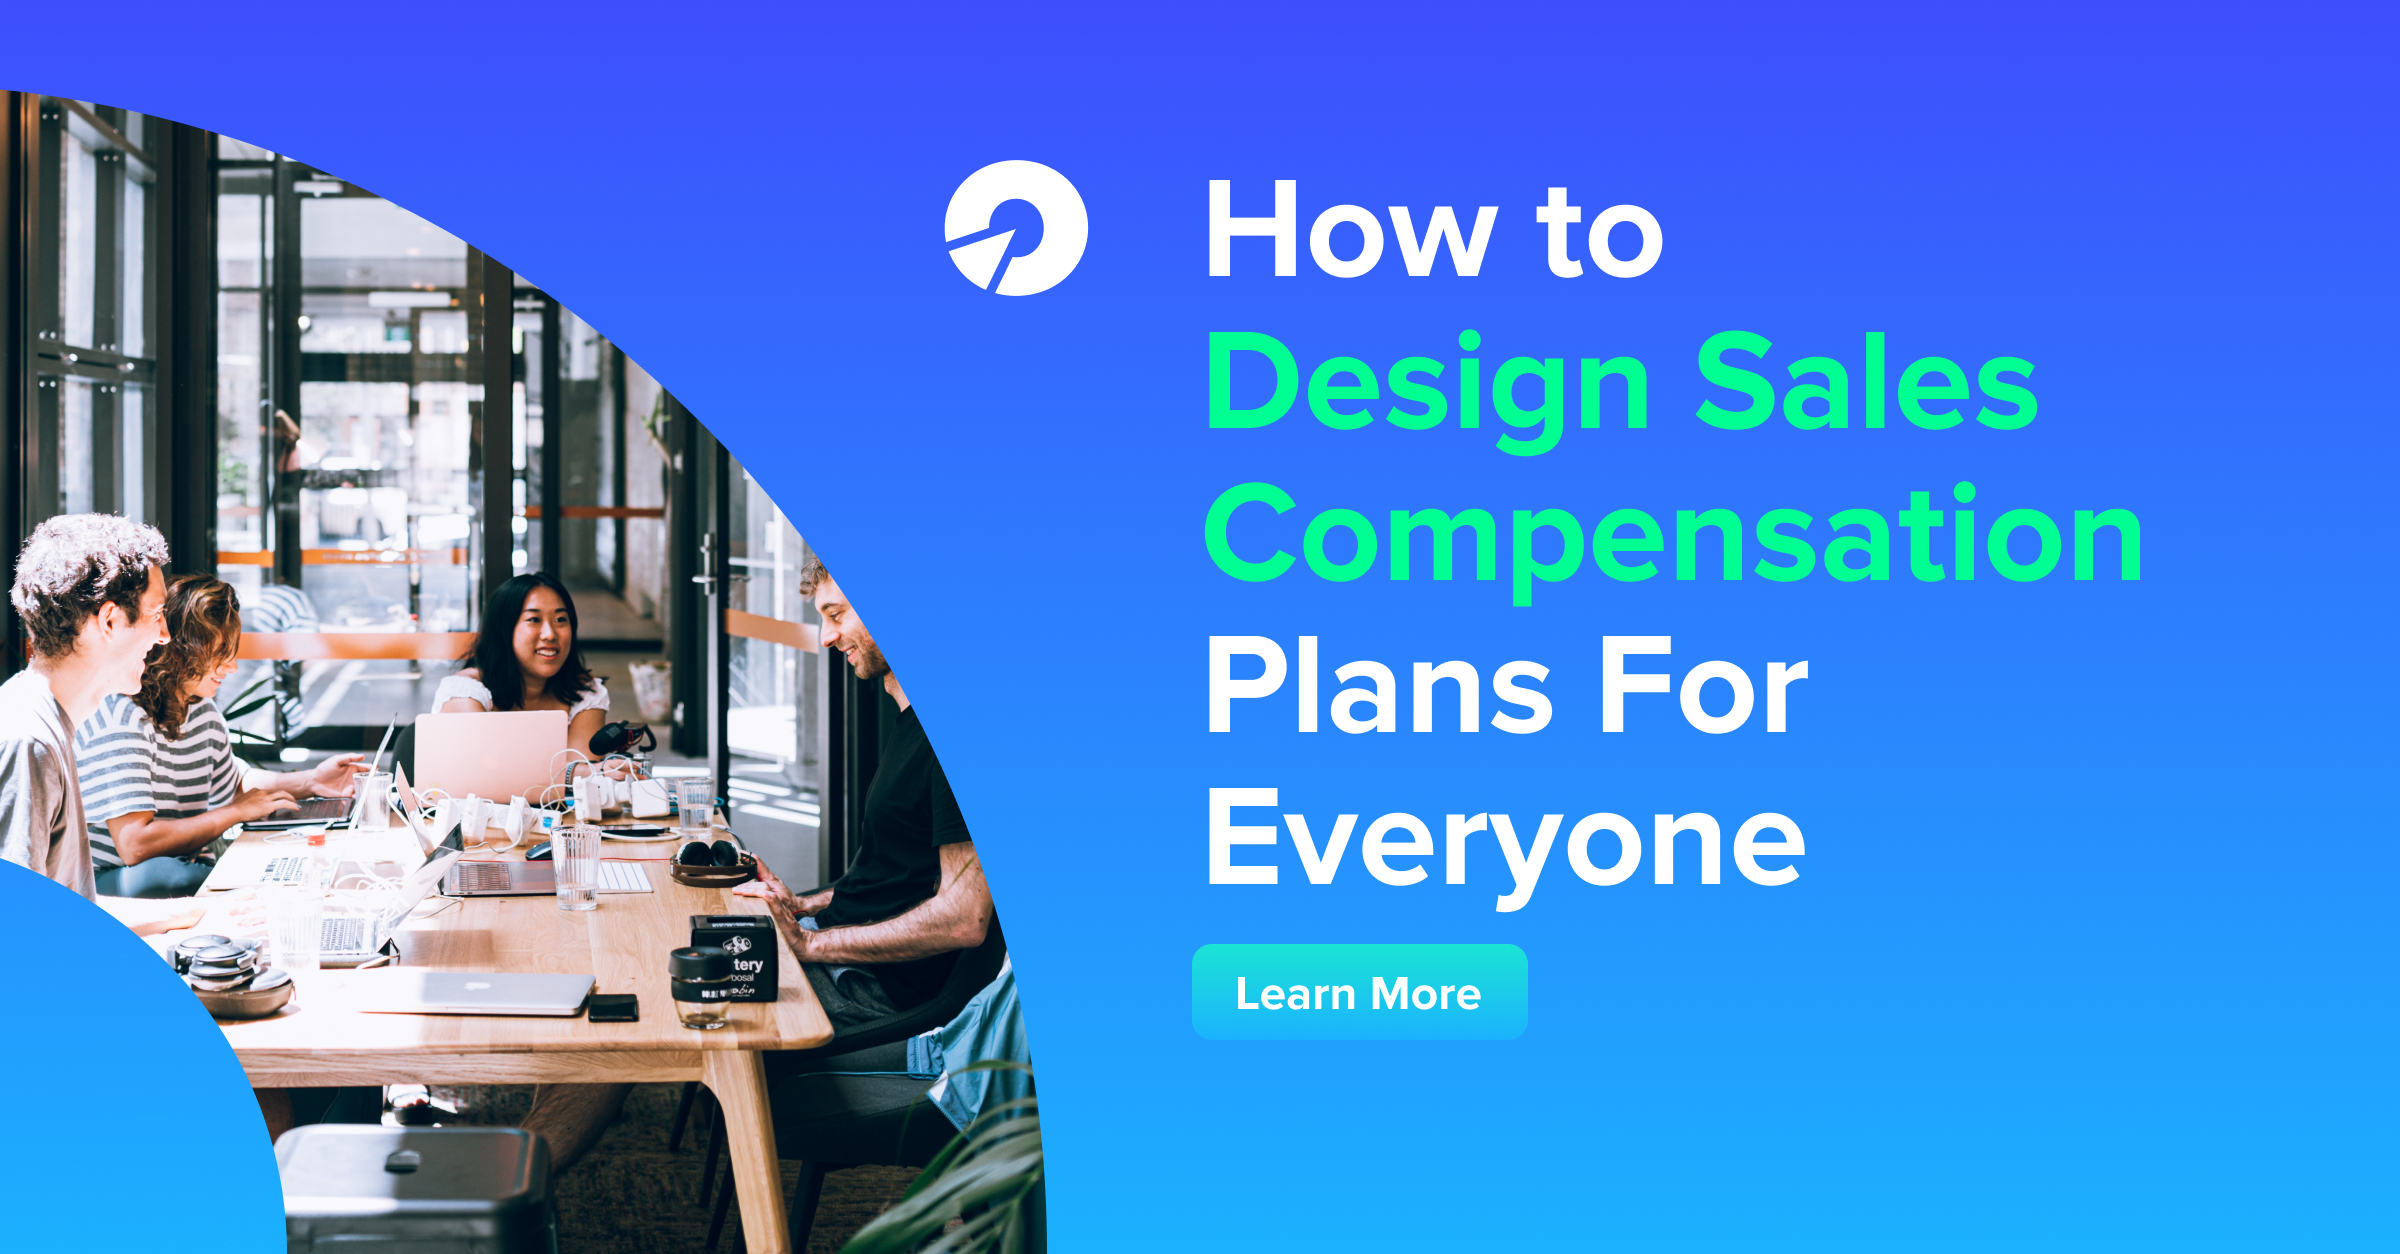 How to Design Sales Compensation Plans For Everyone